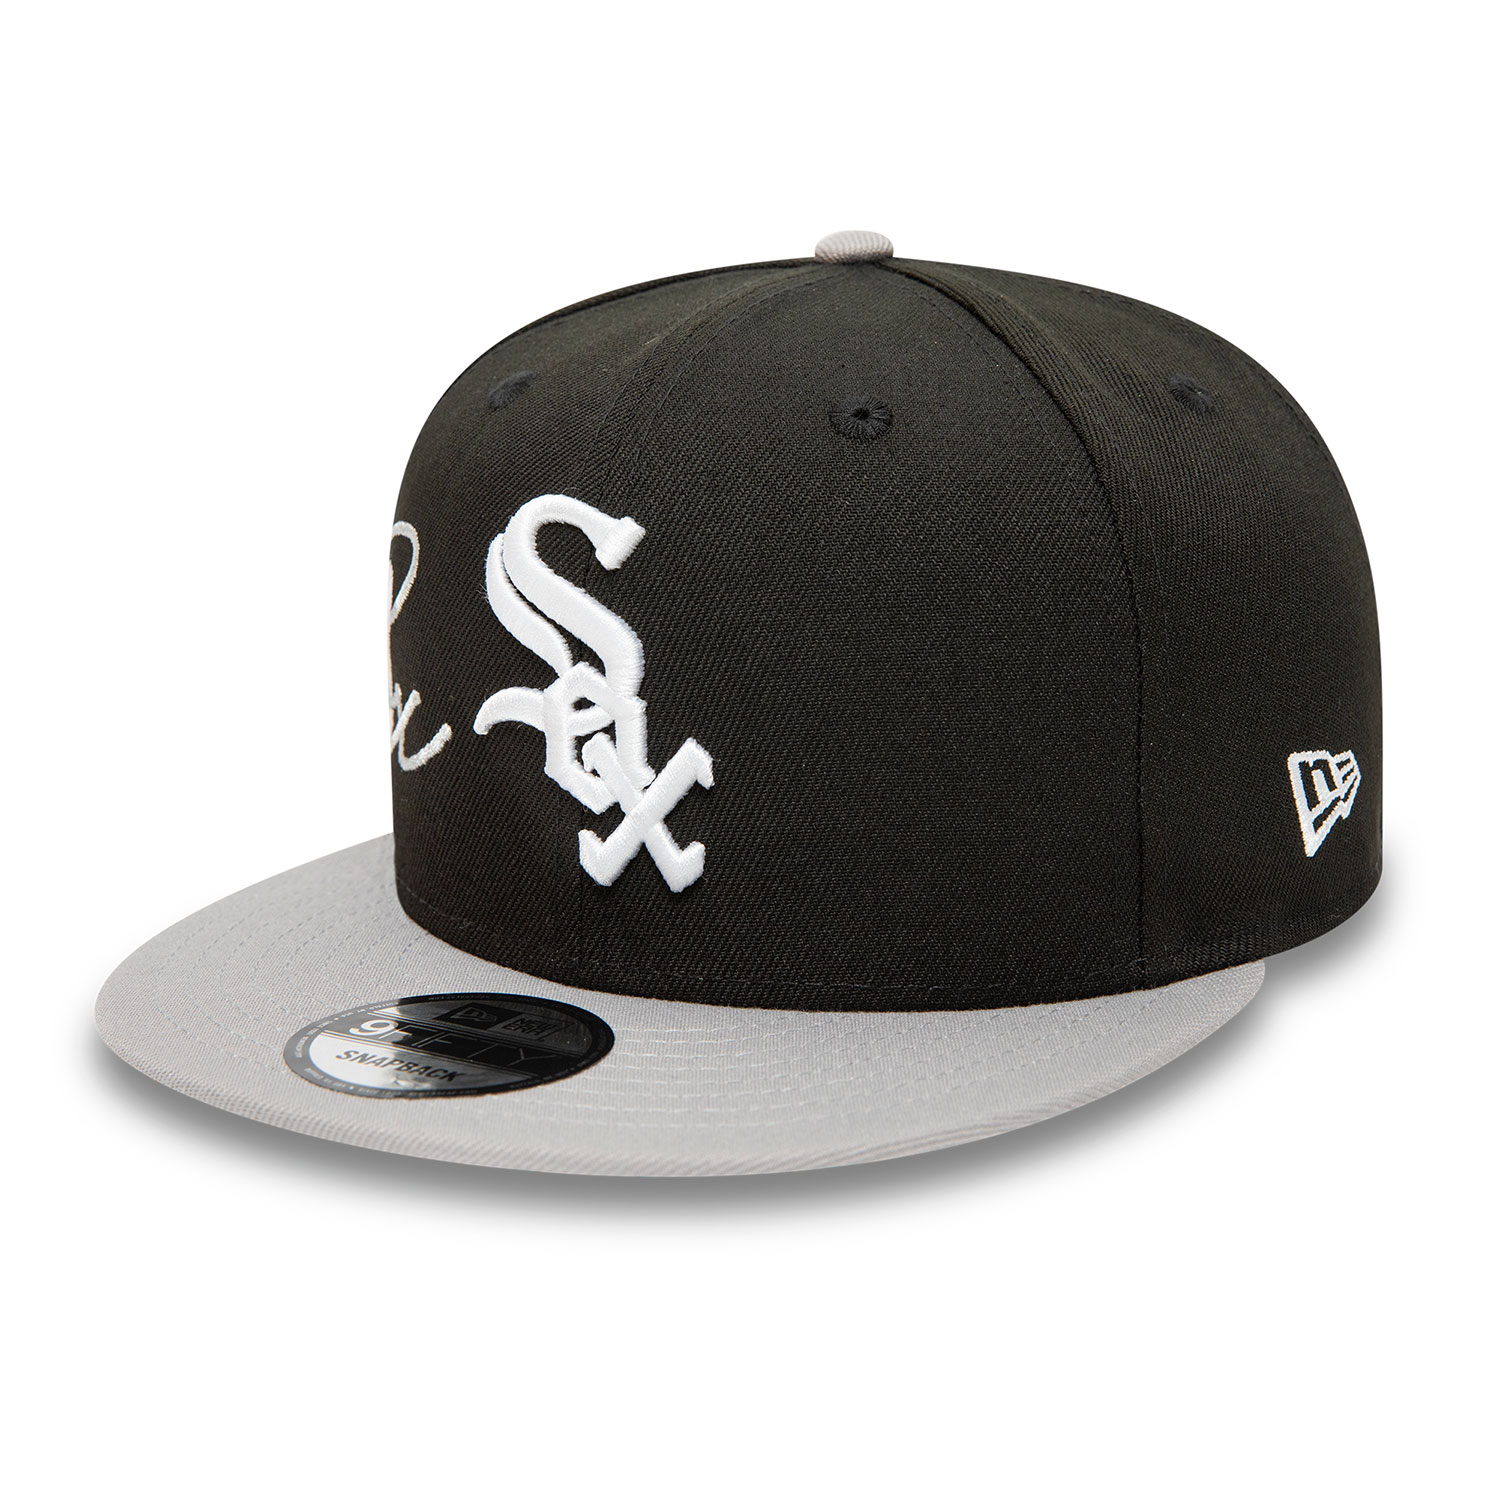 Chicago White Sox Side Font Black 9FIFTY Snapback Cap